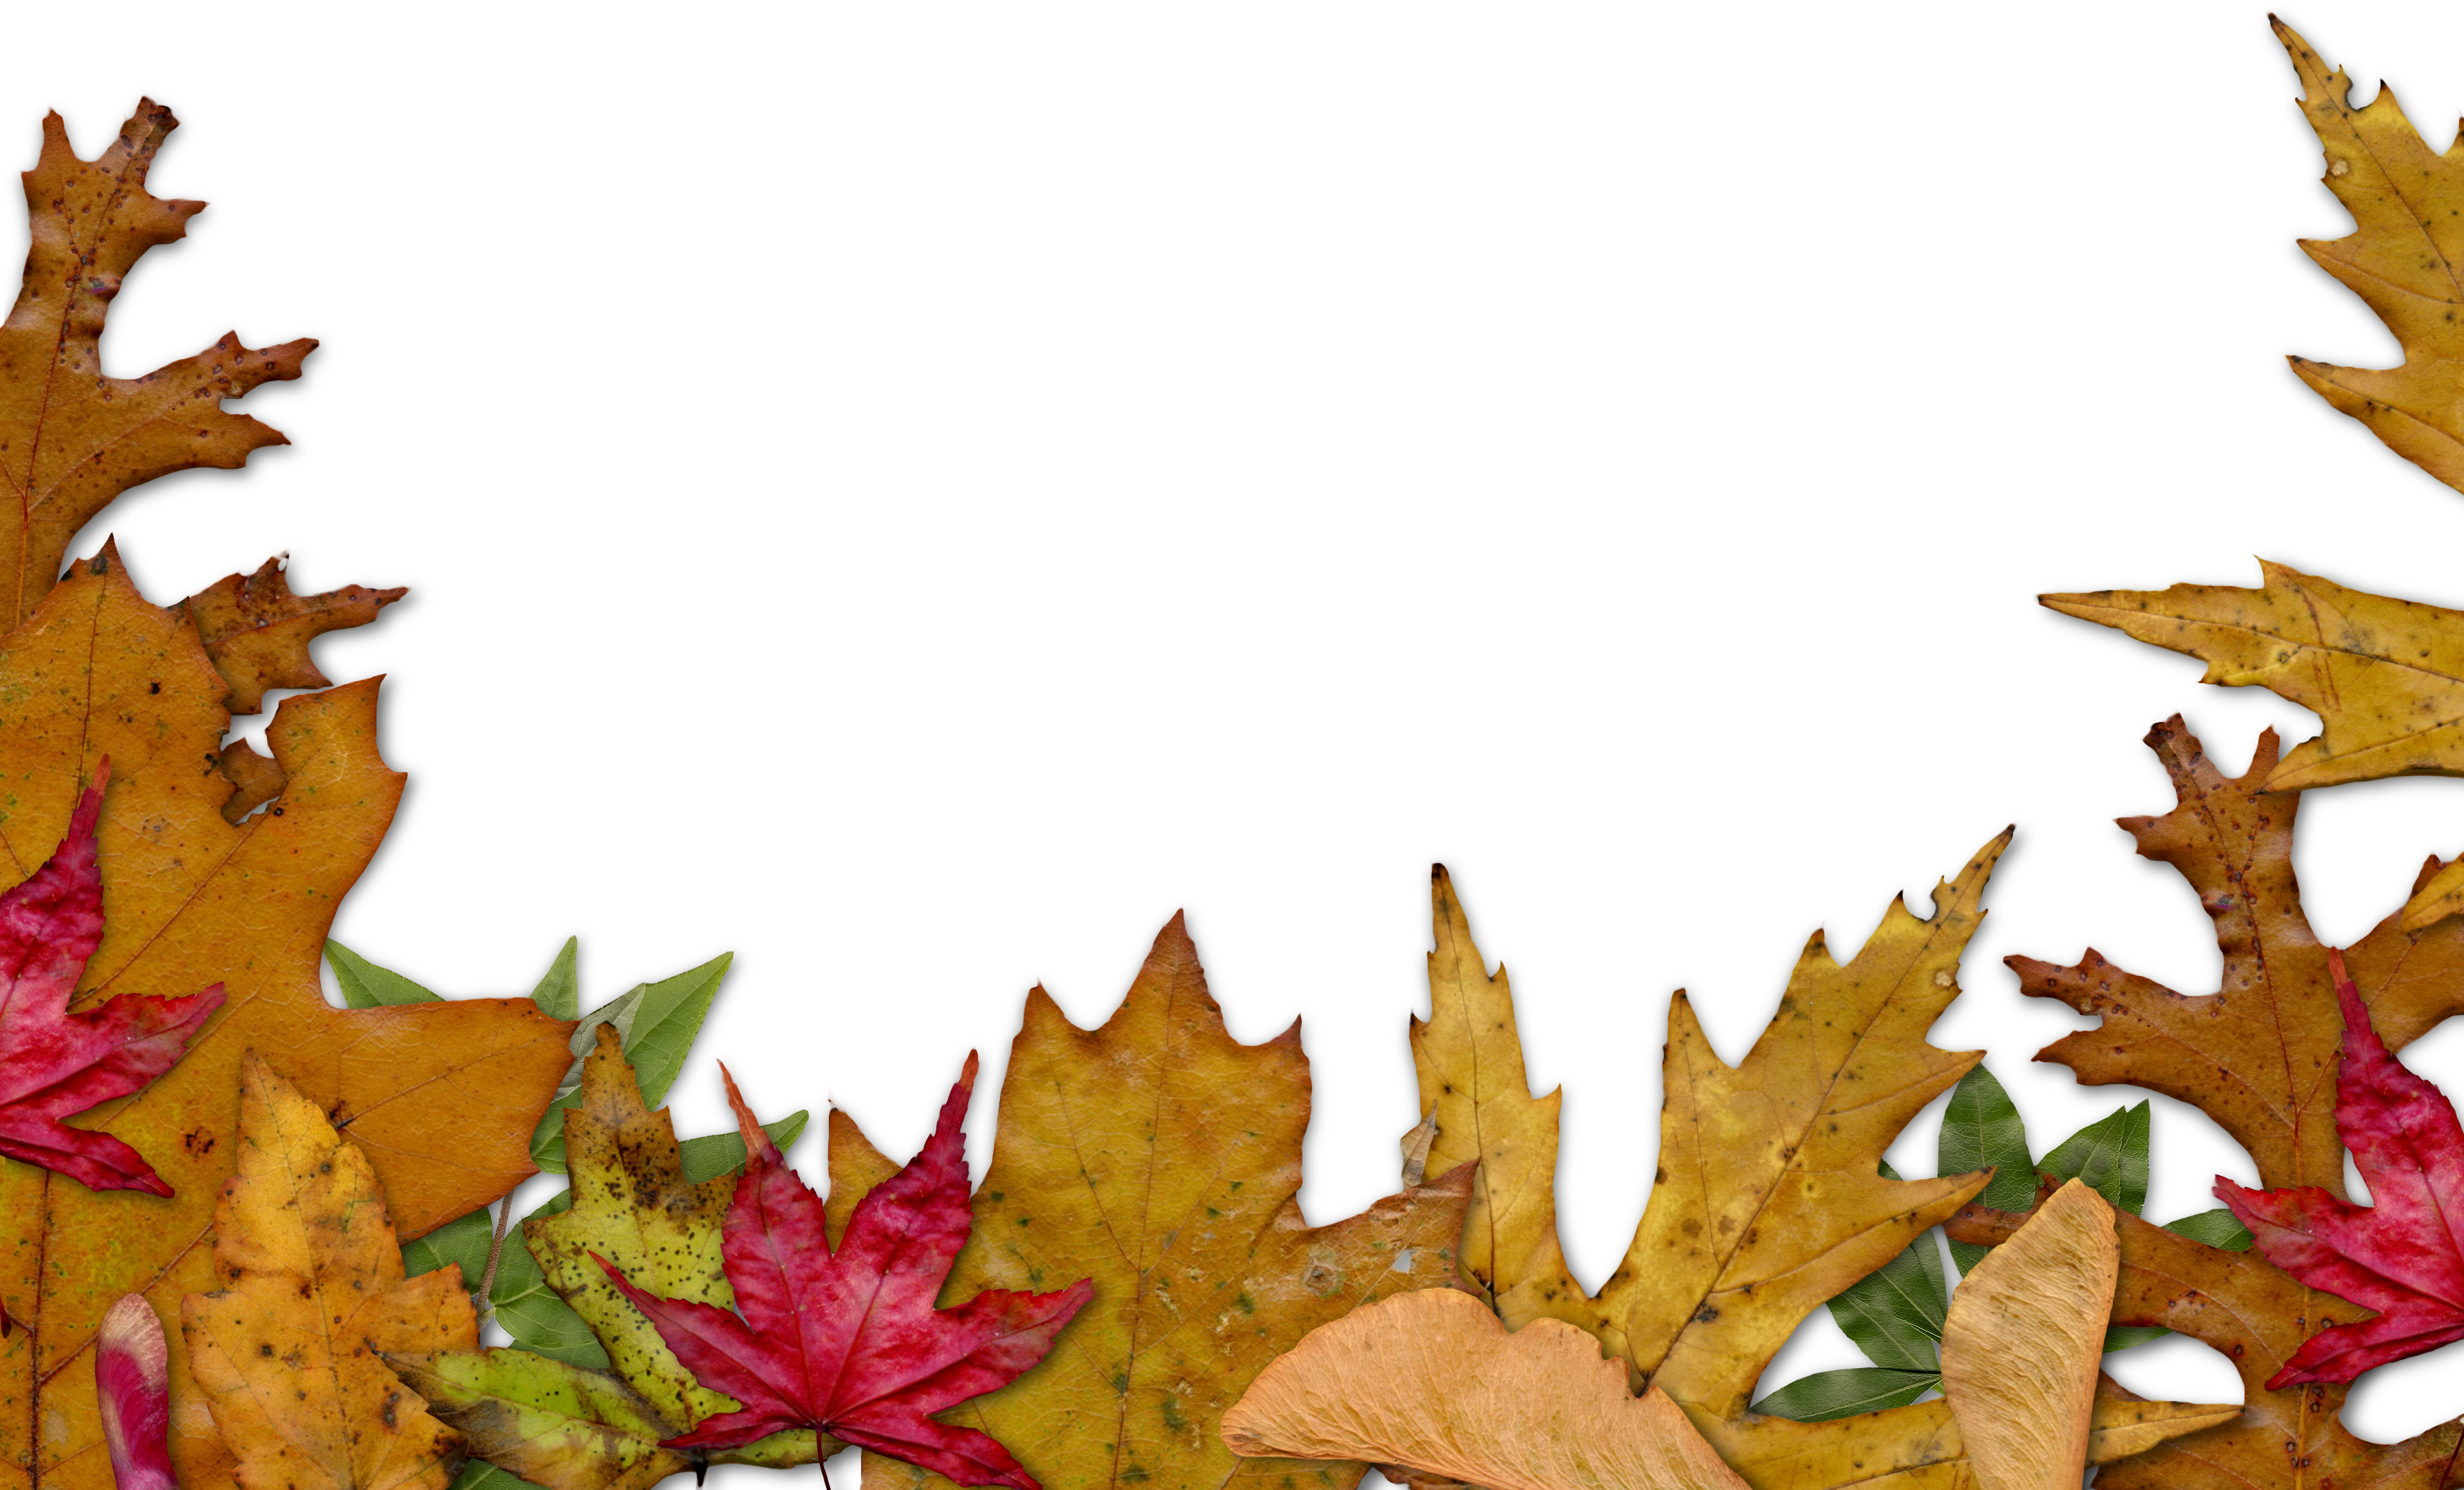 10 Fall Leaves Border Free Cliparts That You Can Download To You